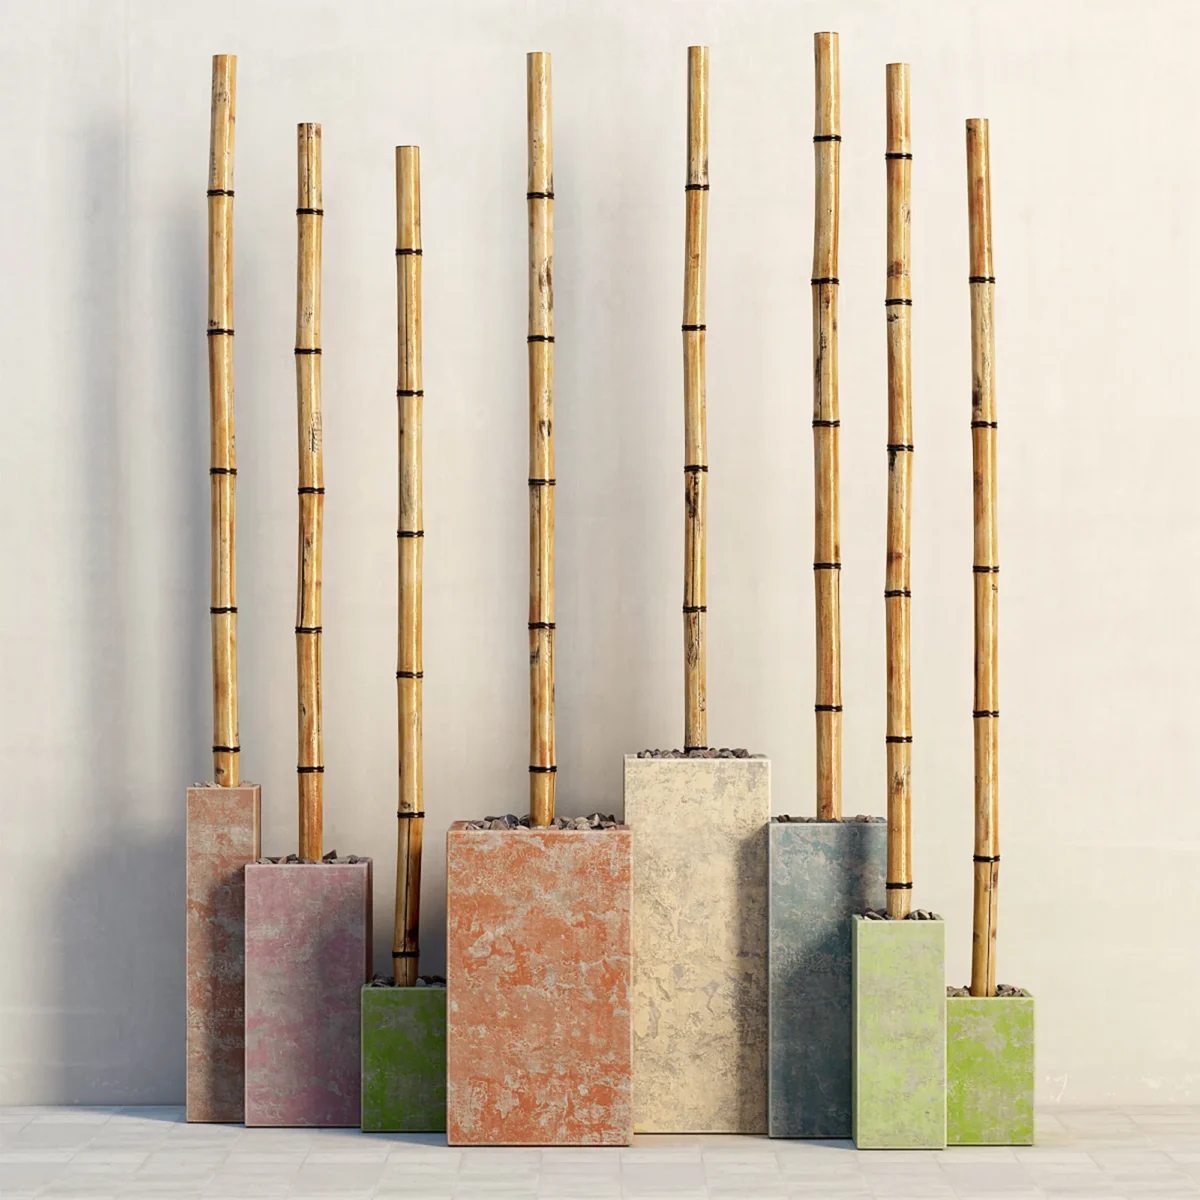 Bamboo decor color box 3D model download on cg.market 3ds max, V-Ray